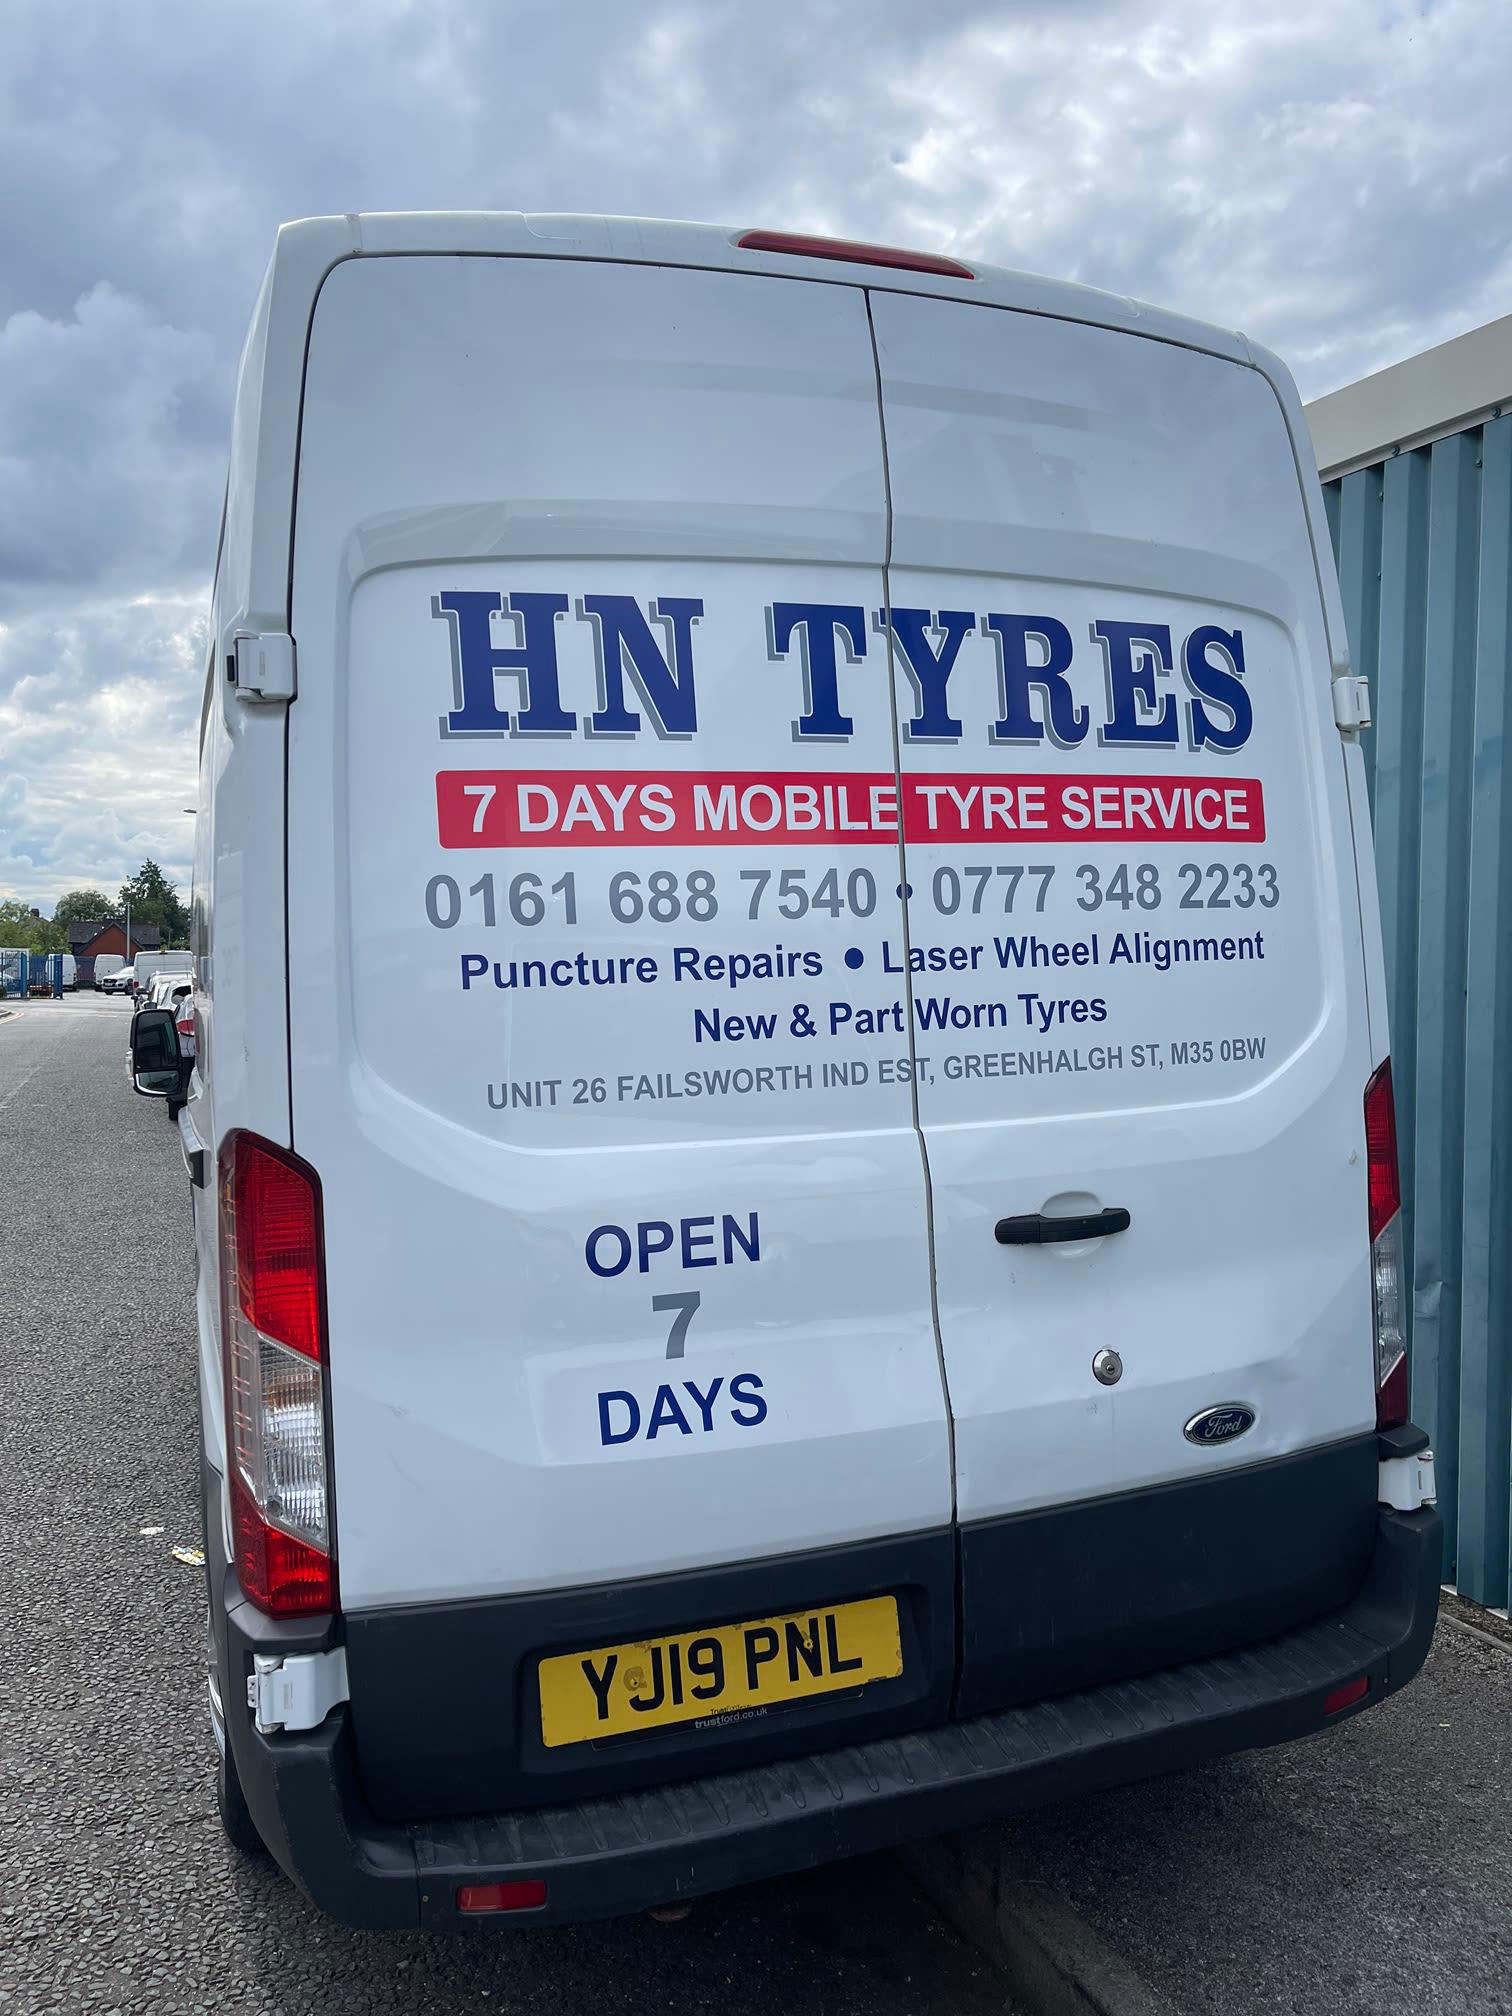 Images HN Tyres 247 Mobile Tyres Fitting